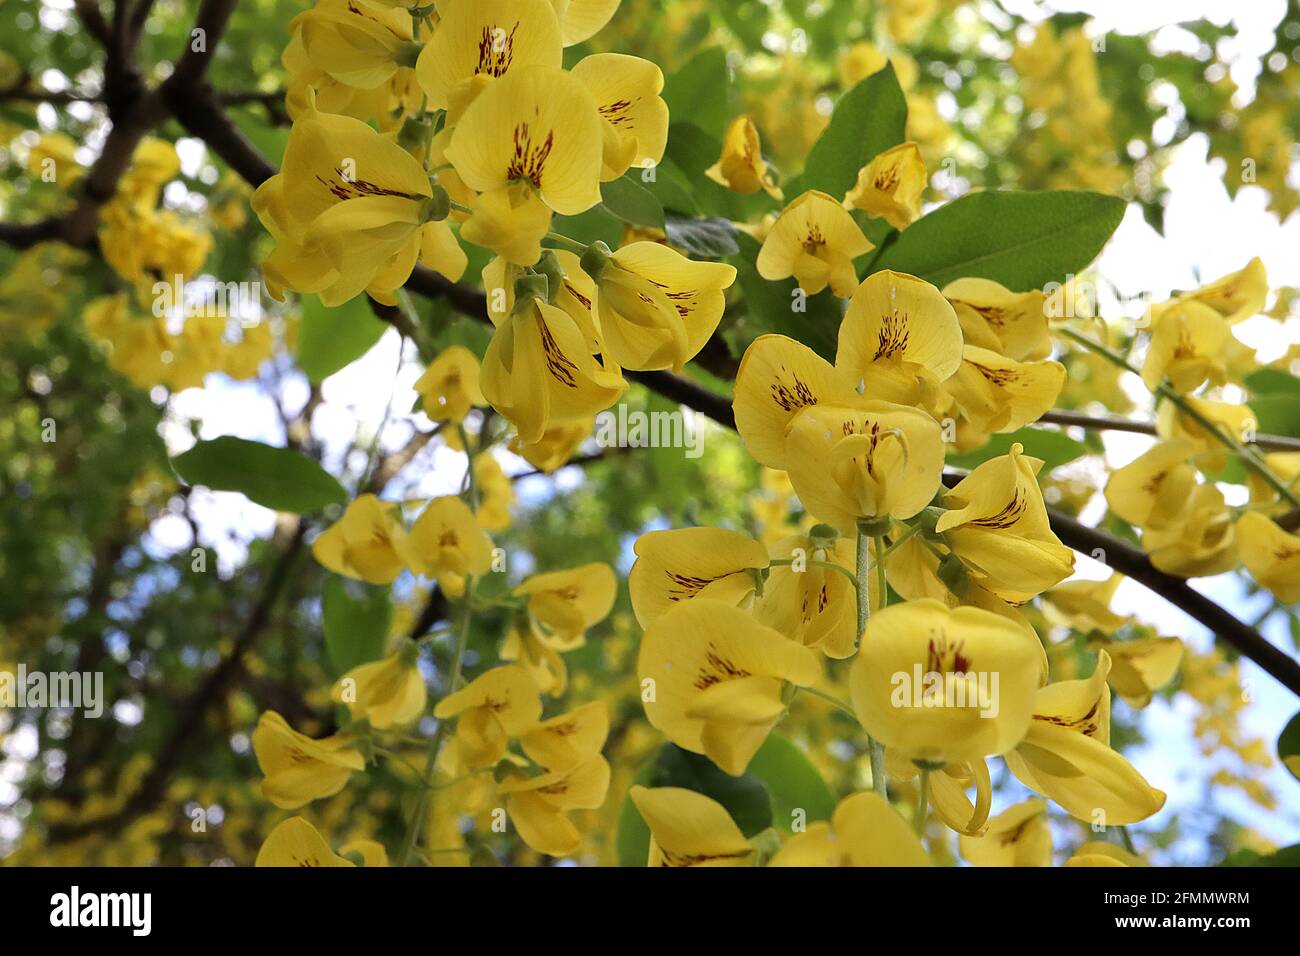 Laburnum x anagyroides ‘Yellow Rocket’ Golden chain tree – yellow pea-like flowers with brown blotch, fresh green ovate leaves,  May, England, UK Stock Photo